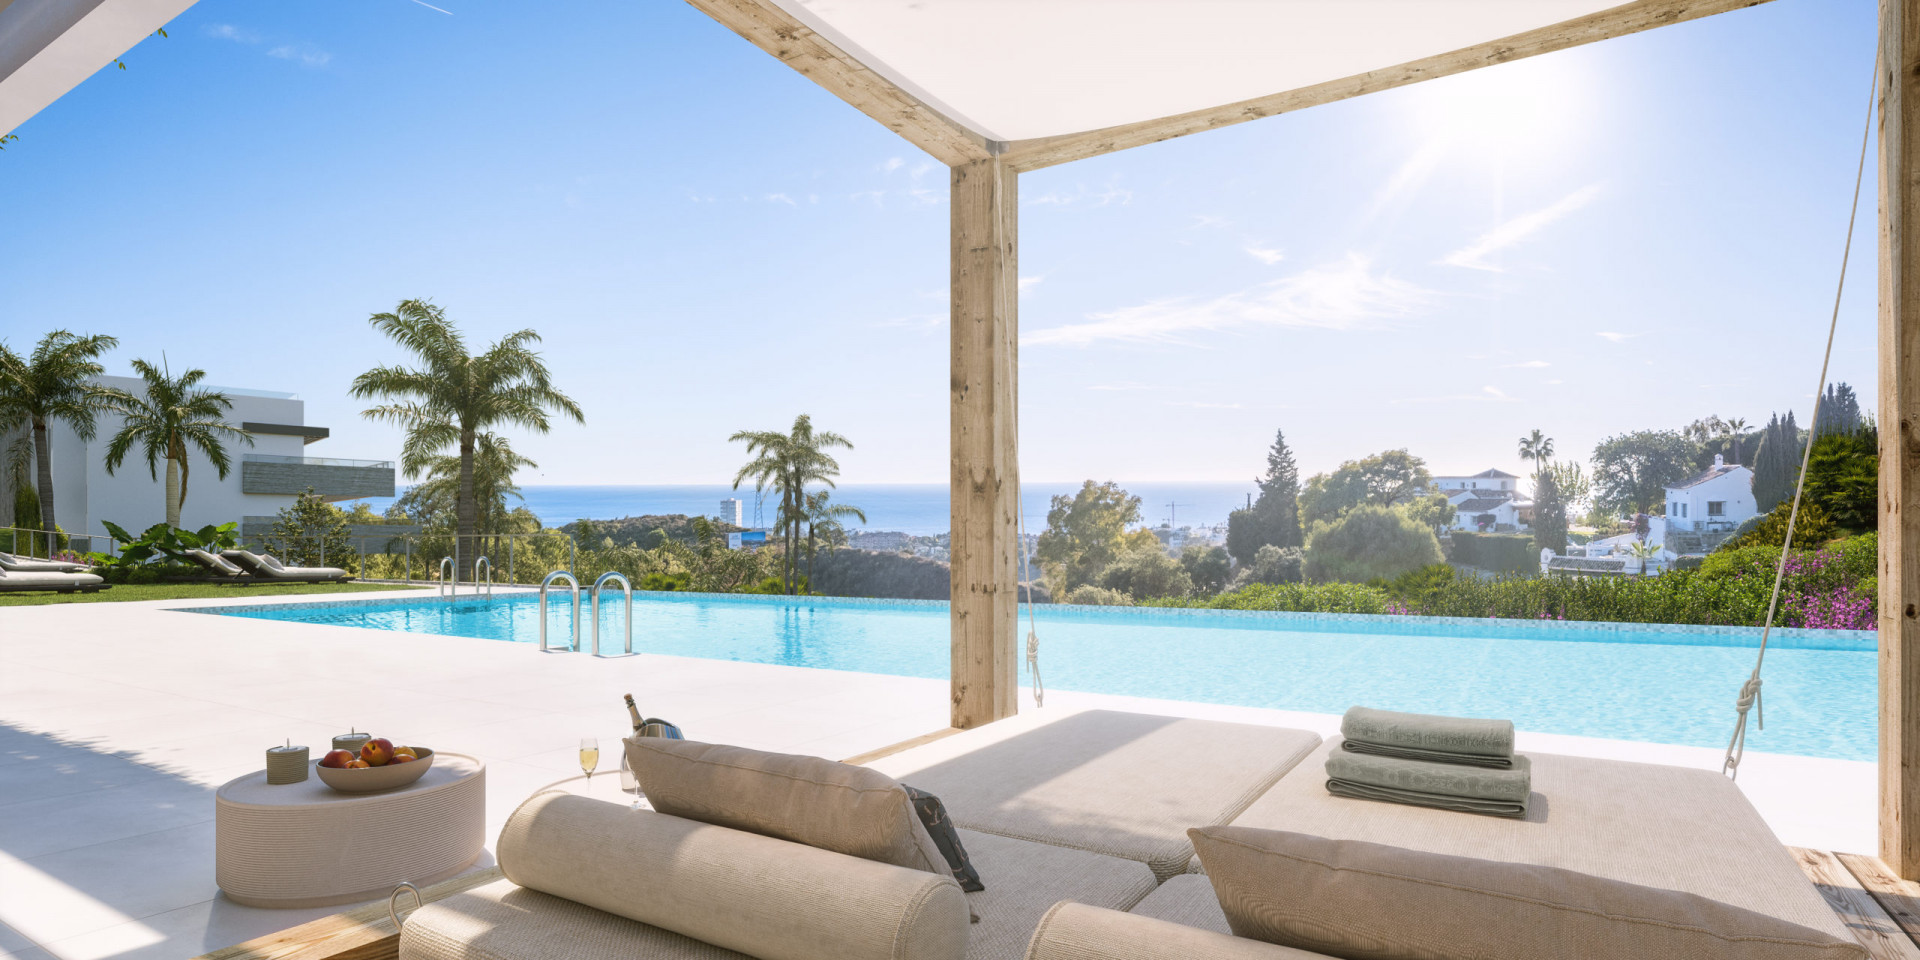 Spacious flat with garden and private pool located east of Marbella. | Image 10